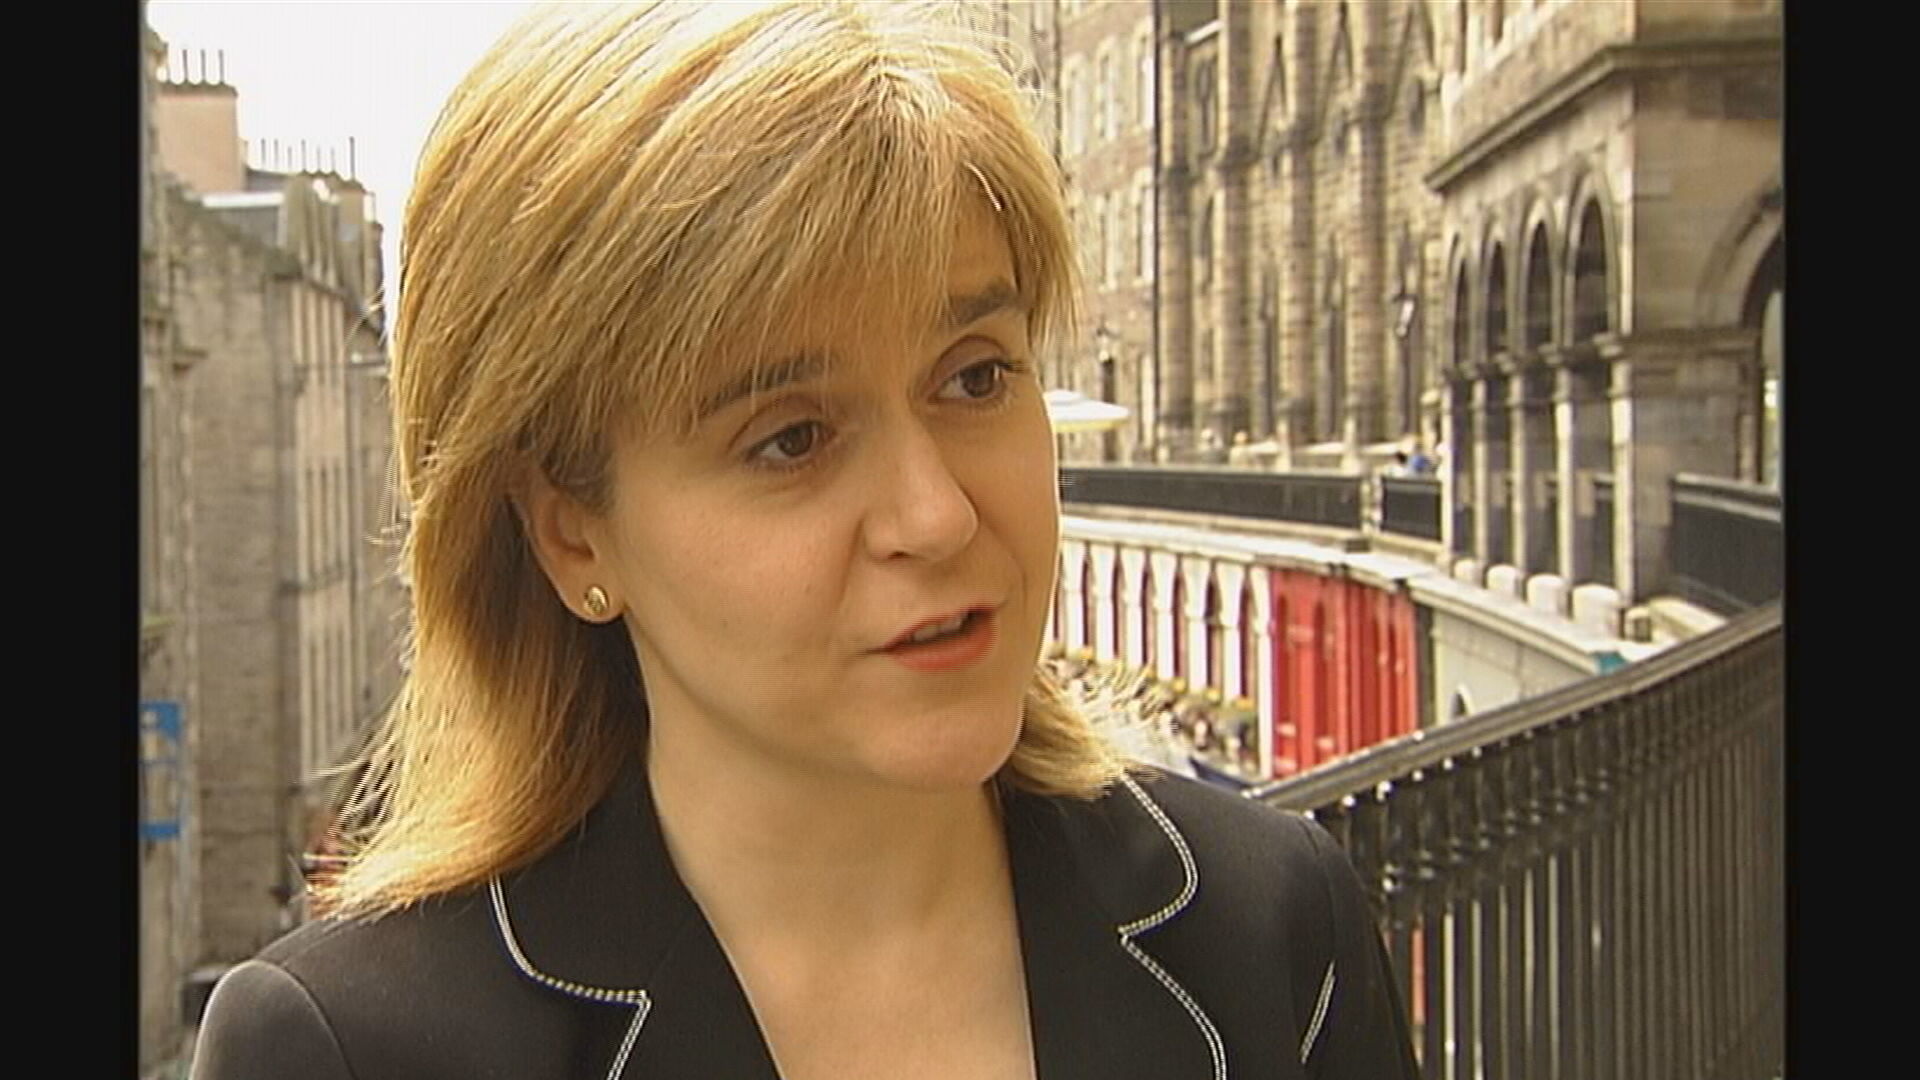 Nicola Sturgeon was elected depute leader after running on joint ticket with Salmond.